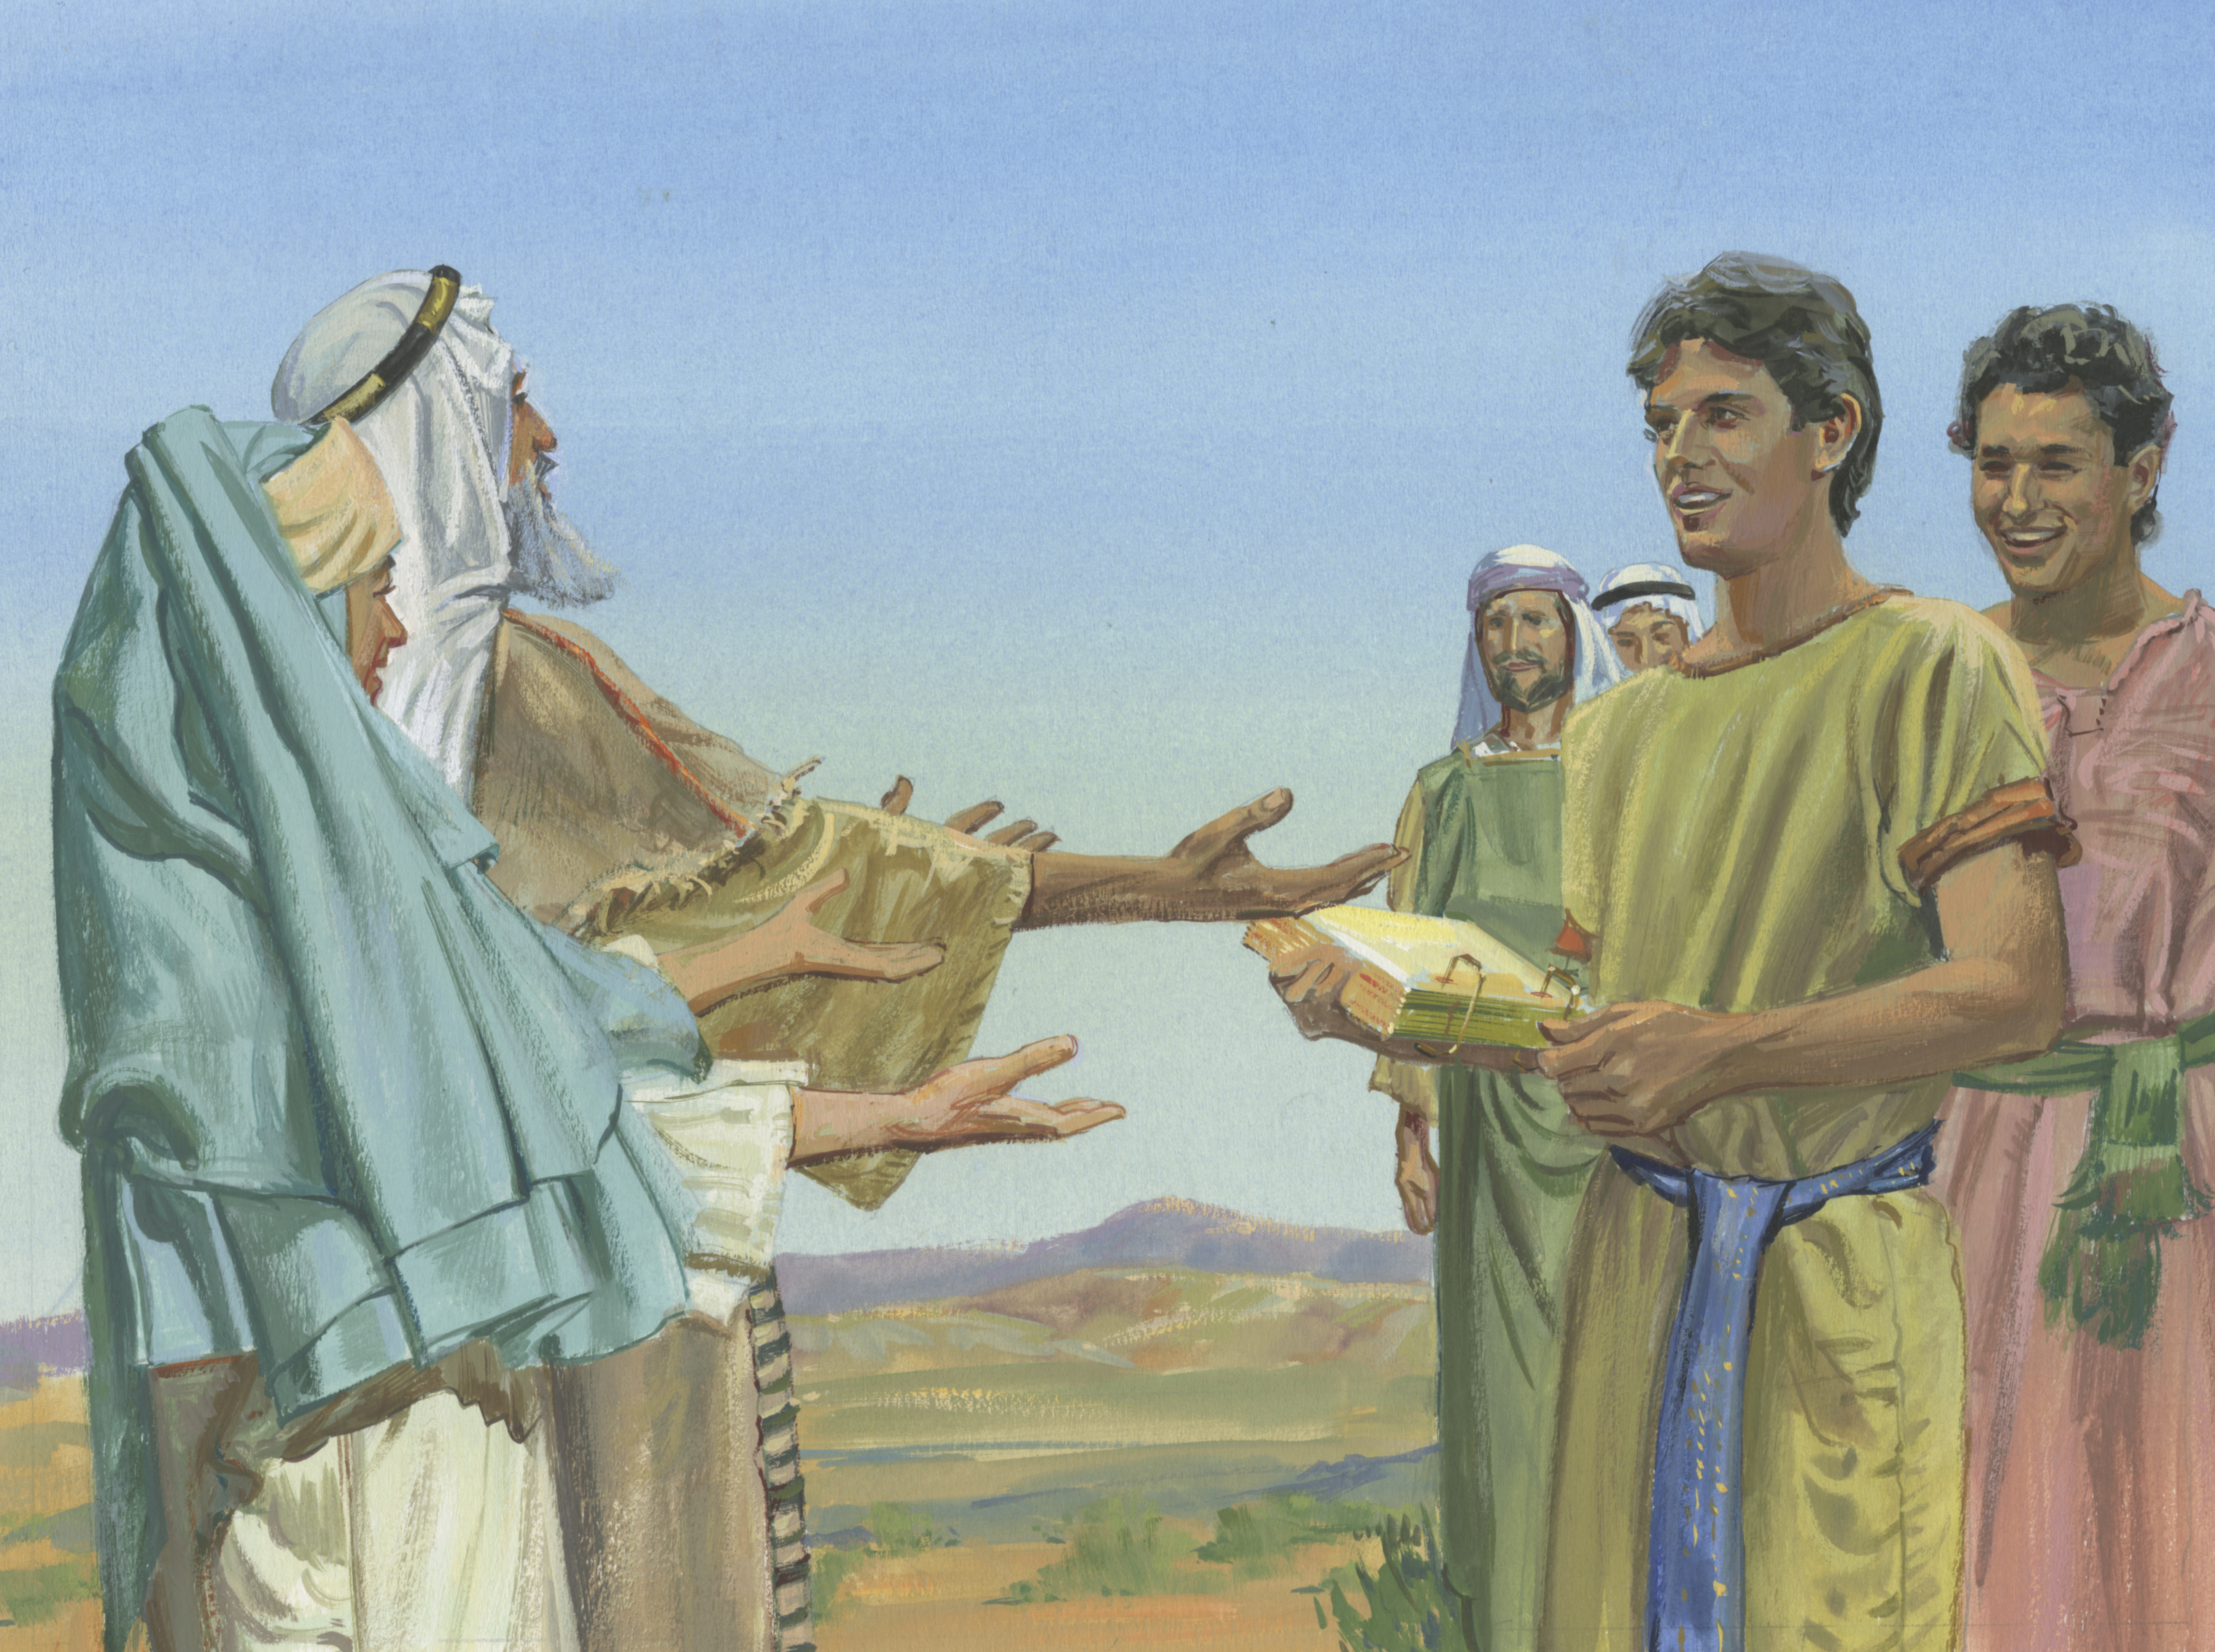 A painting by Jerry Thompson depicting Nephi returning to Lehi with the brass plates; Primary manual 4-8